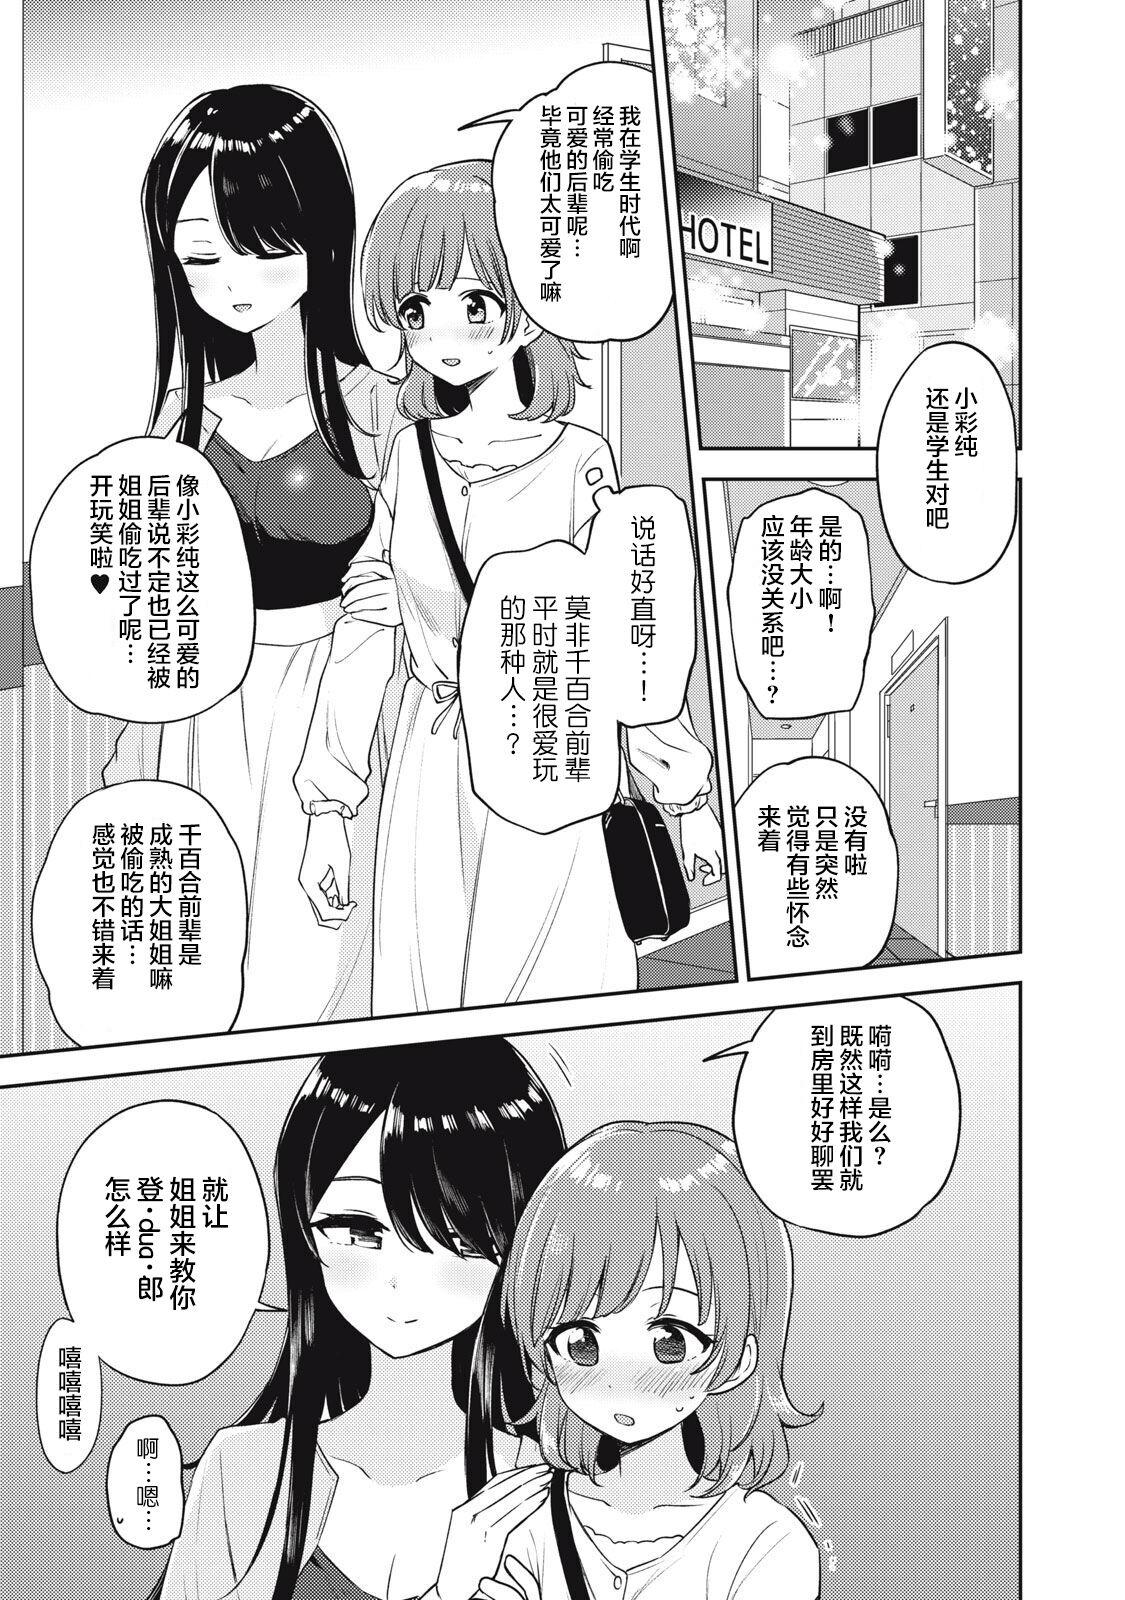 Cavala Asumi-chan Is Interested In Lesbian Brothels! Extra Episode Moan - Page 3